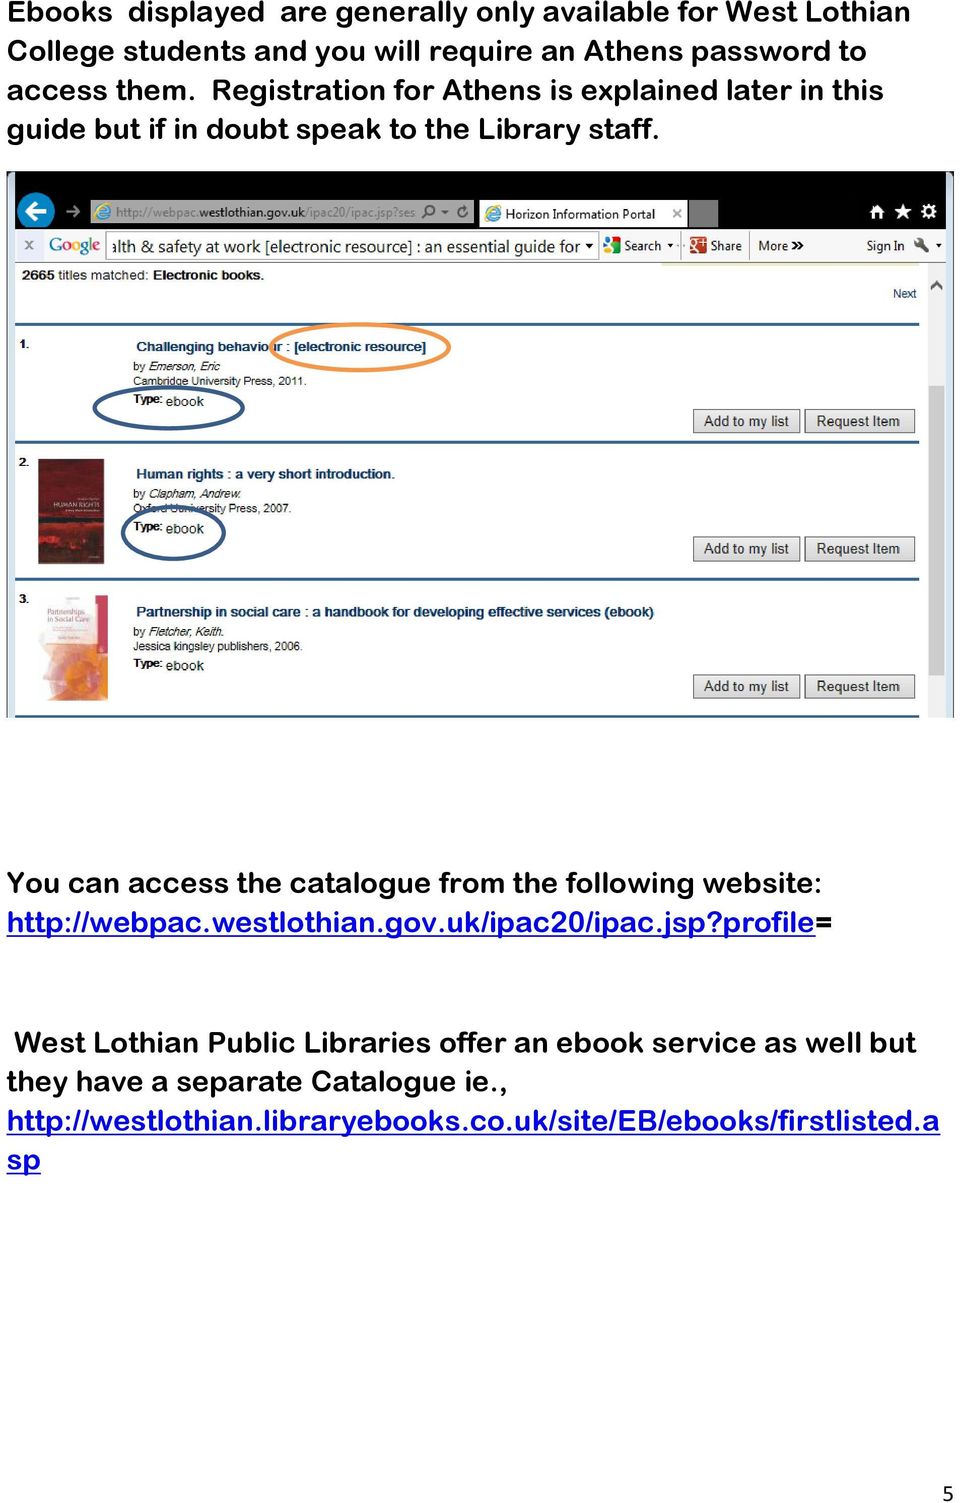 You can access the catalogue from the following website: http://webpac.westlothian.gov.uk/ipac20/ipac.jsp?